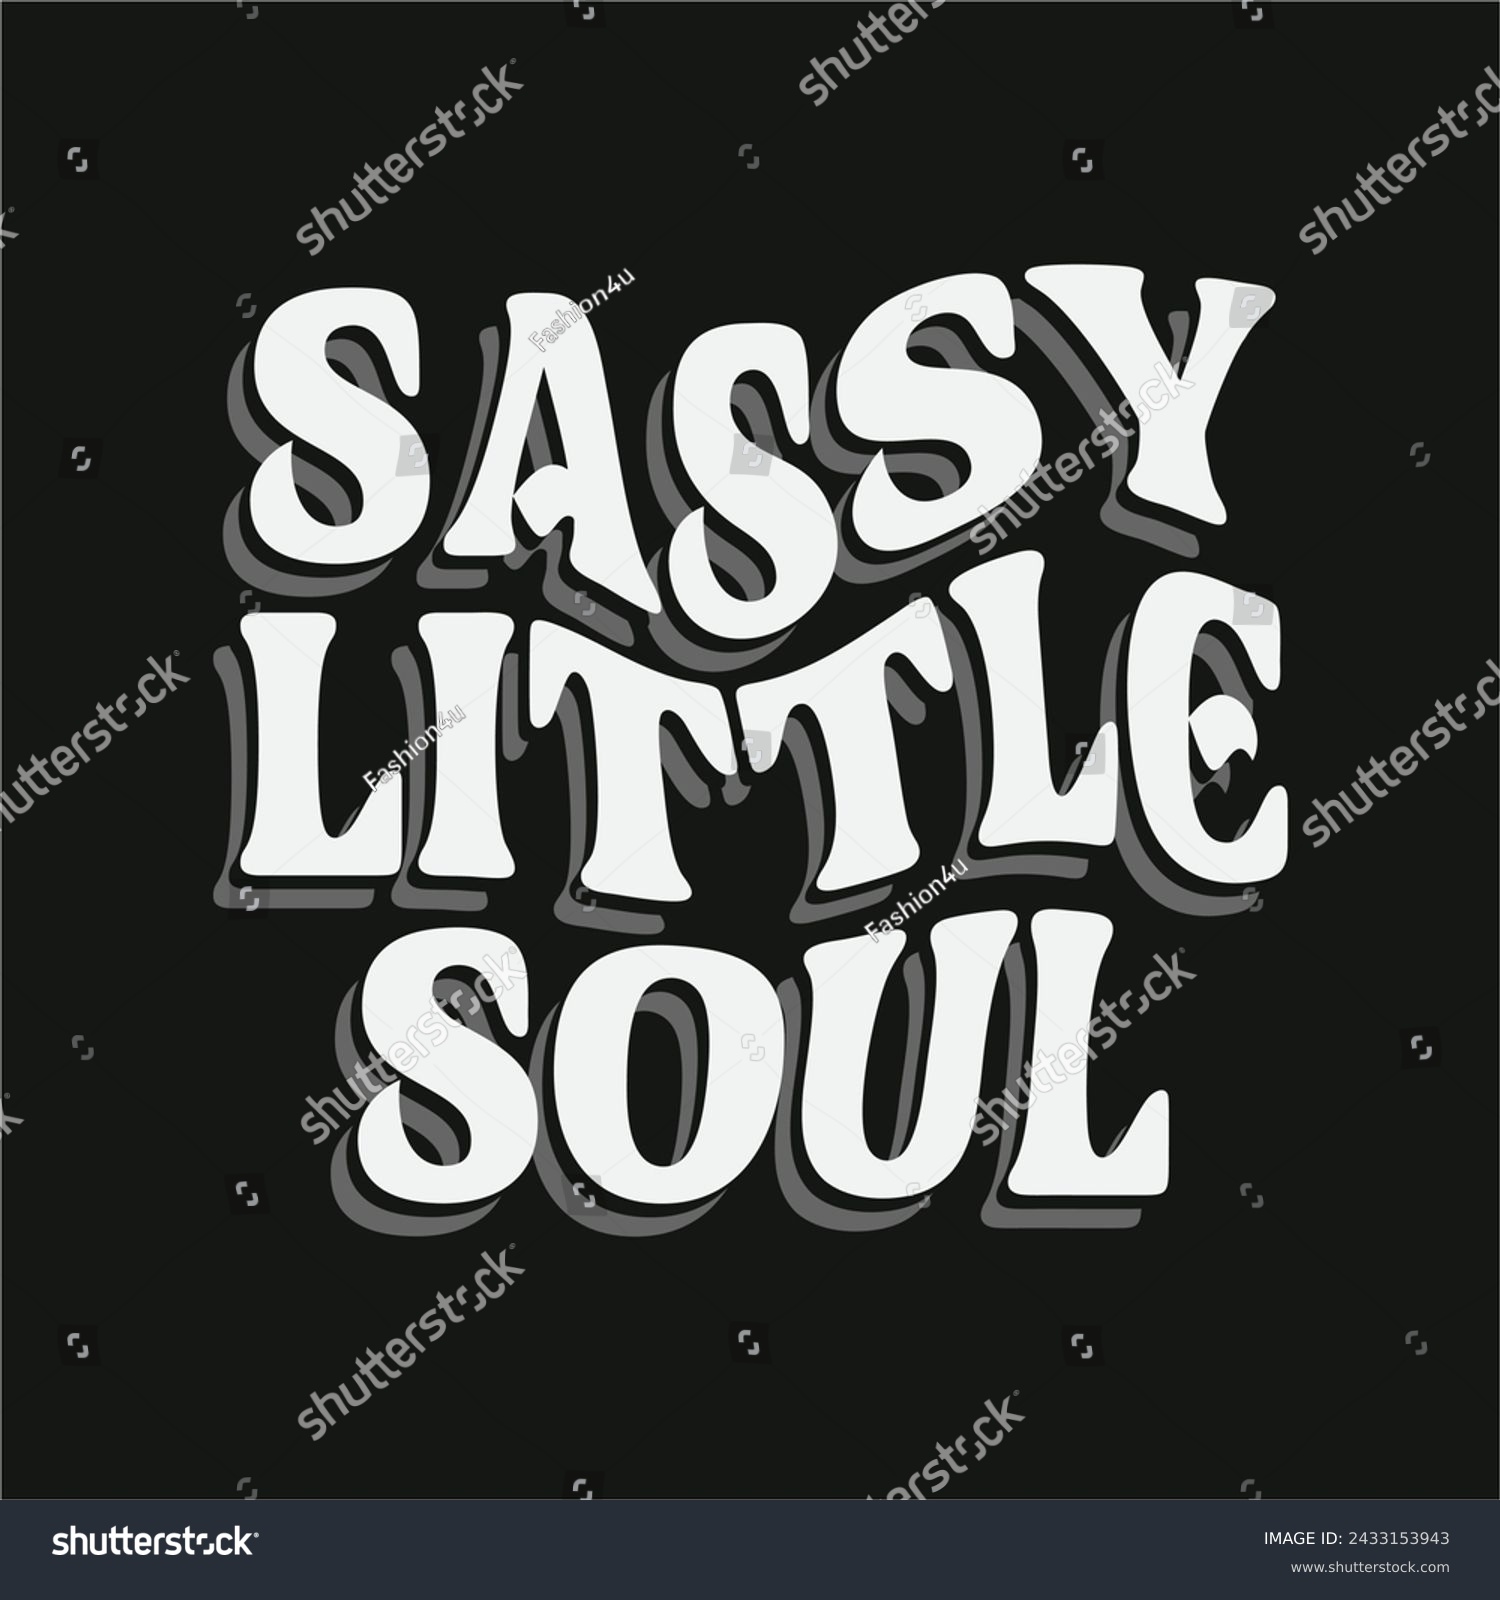 SVG of Sassy little soul typography slogan for fashion t shirt printing, tee graphic design, vector illustration. svg